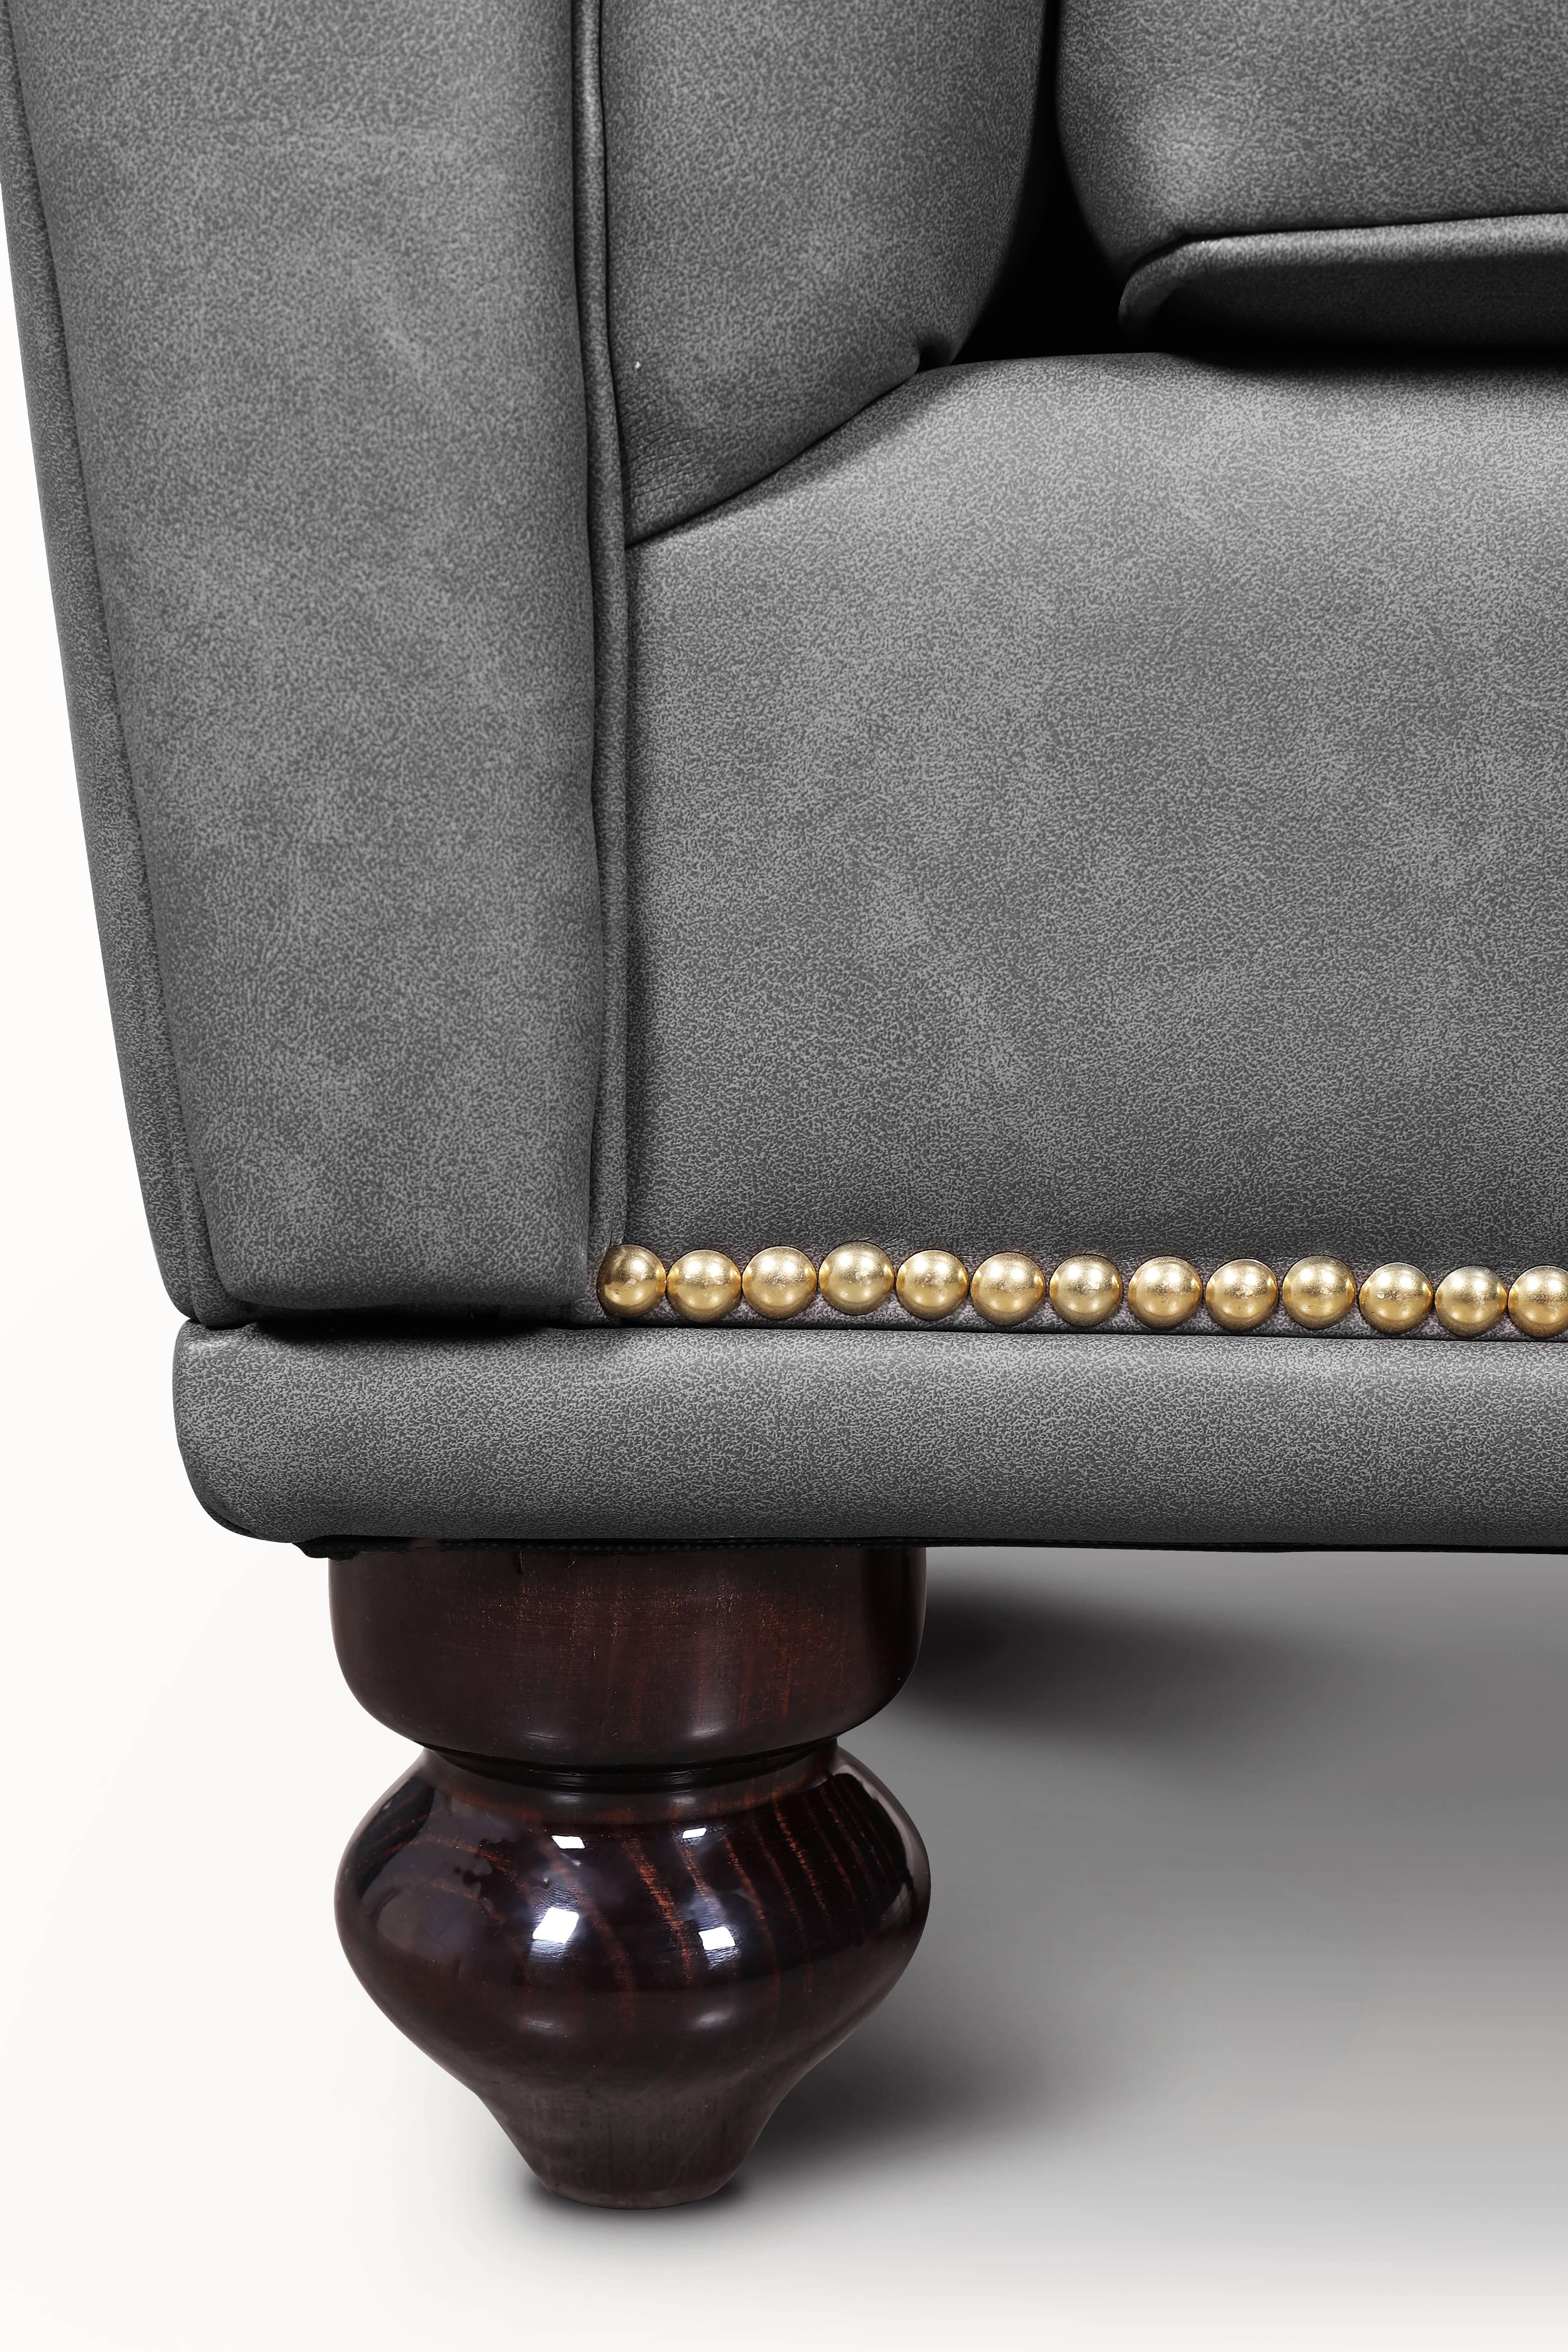 Contemporary Modern Restyling of the Early 19th Century British Chesterfield Leather Armchair